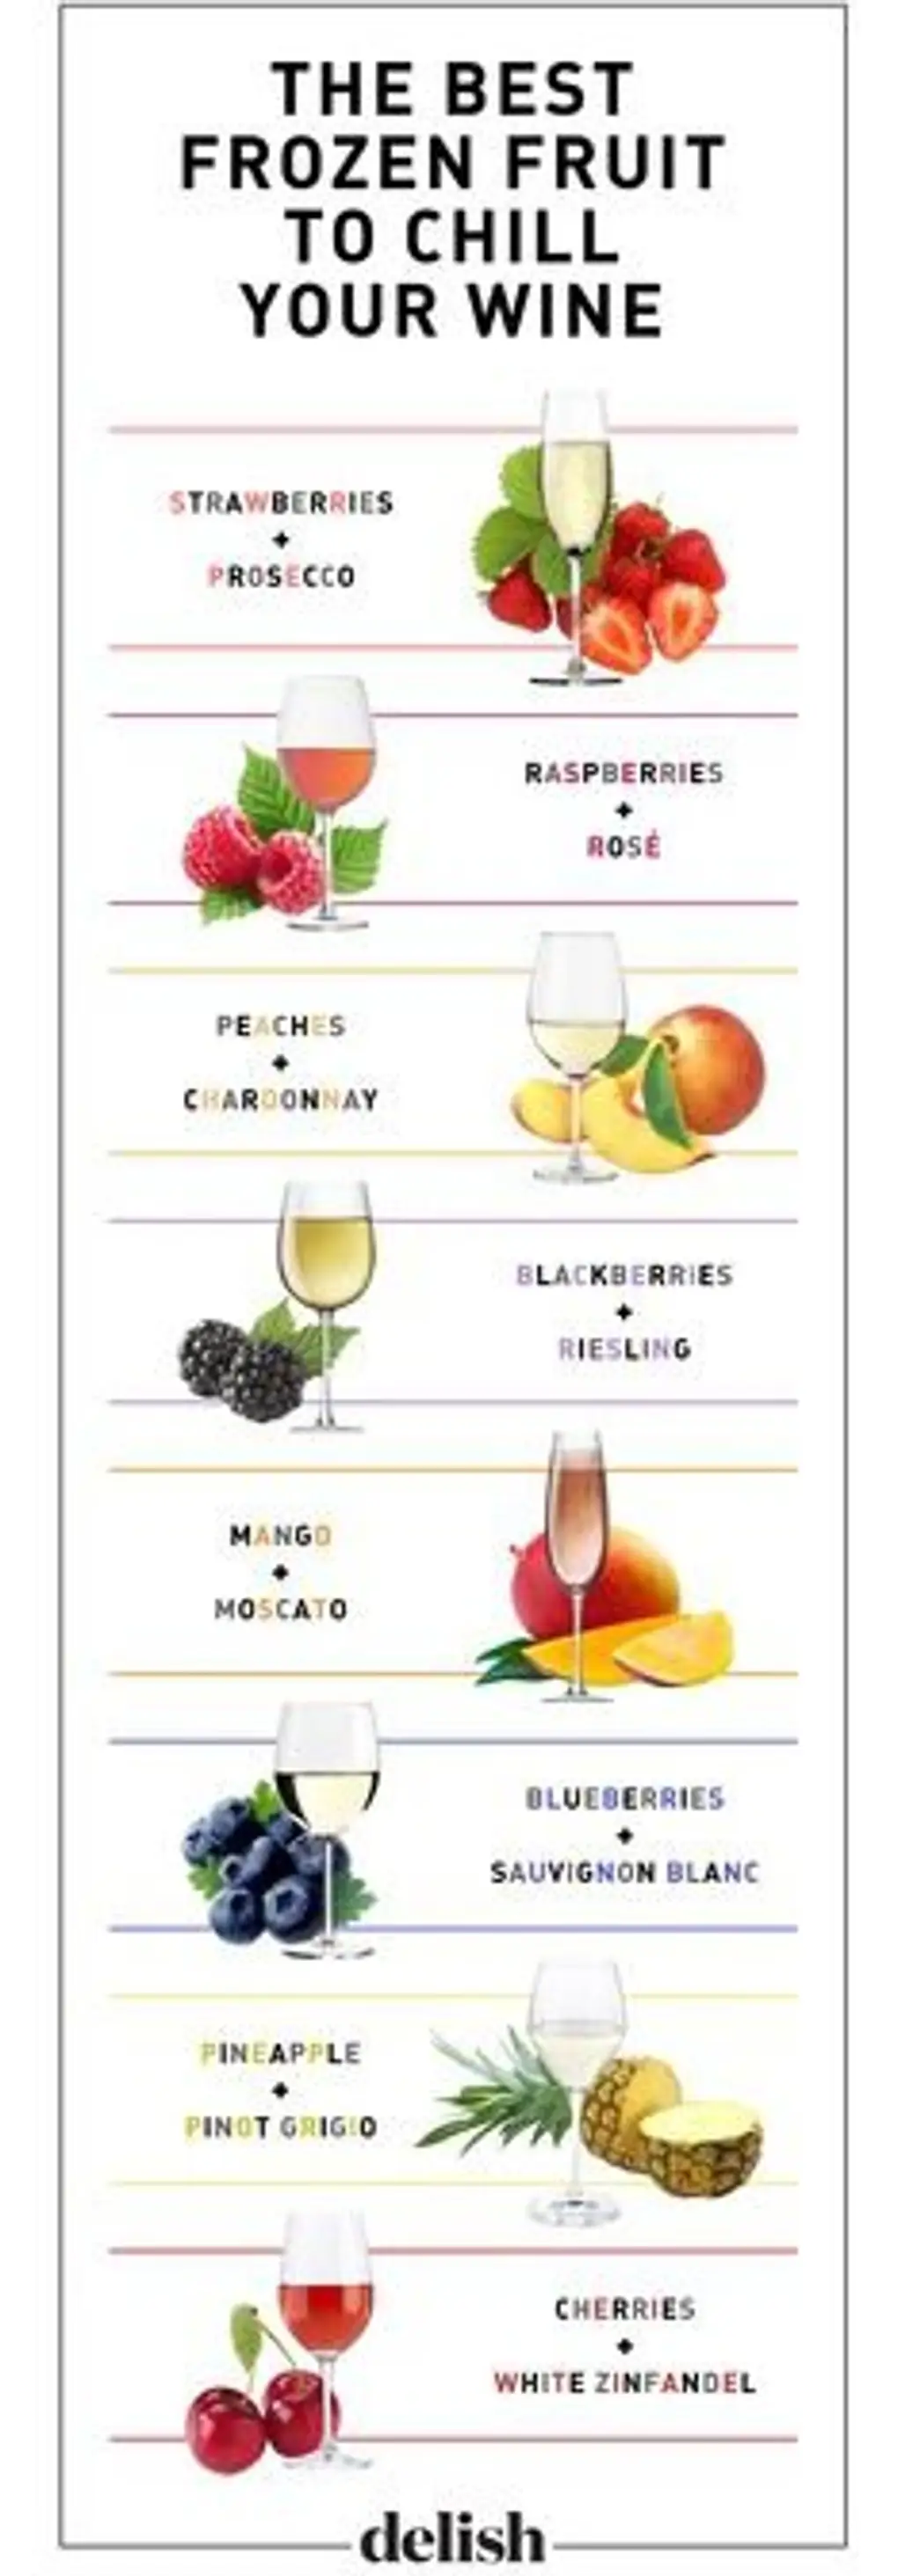 The Best Frozen Fruit Guide to Chill Your Wine